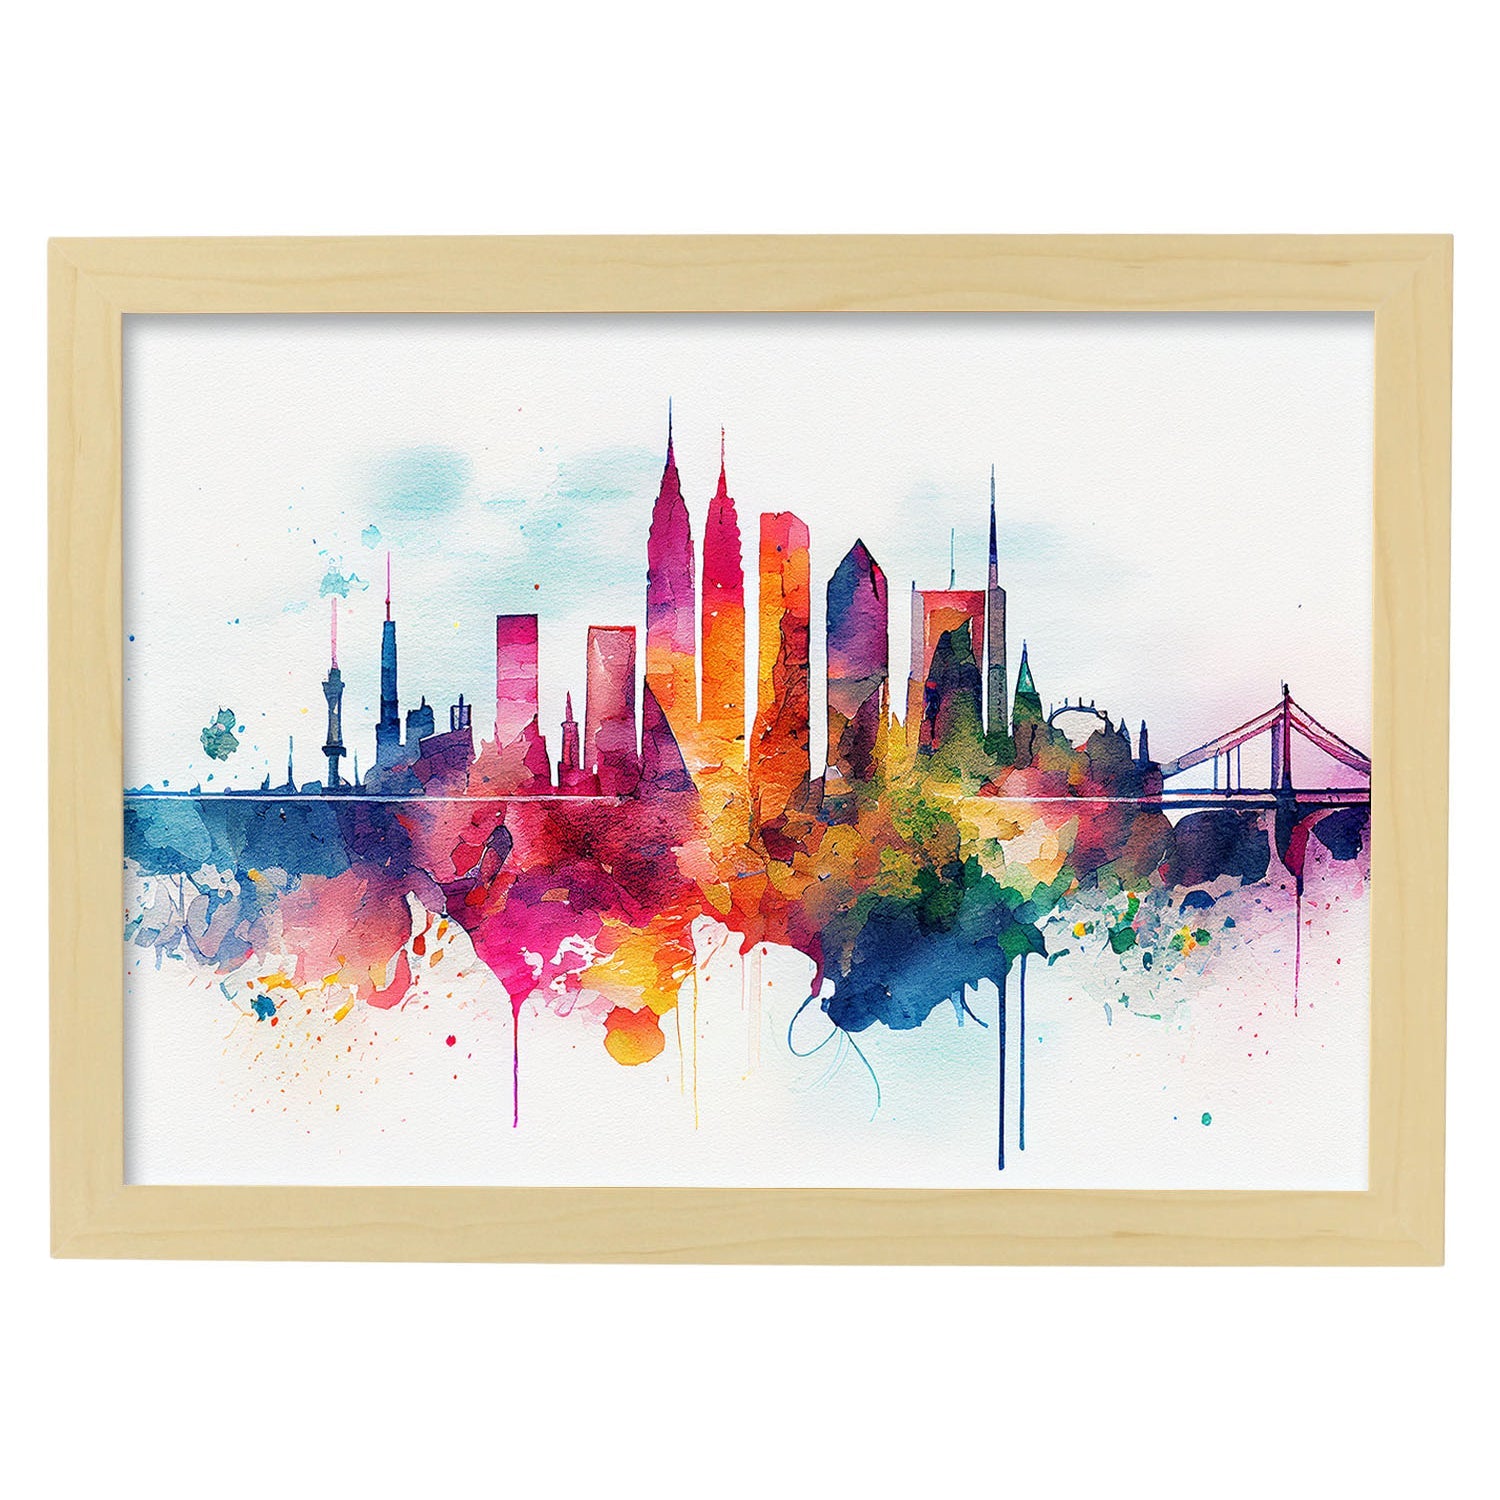 Nacnic watercolor of a skyline of the city of Frankfurt. Aesthetic Wall Art Prints for Bedroom or Living Room Design.-Artwork-Nacnic-A4-Marco Madera Clara-Nacnic Estudio SL